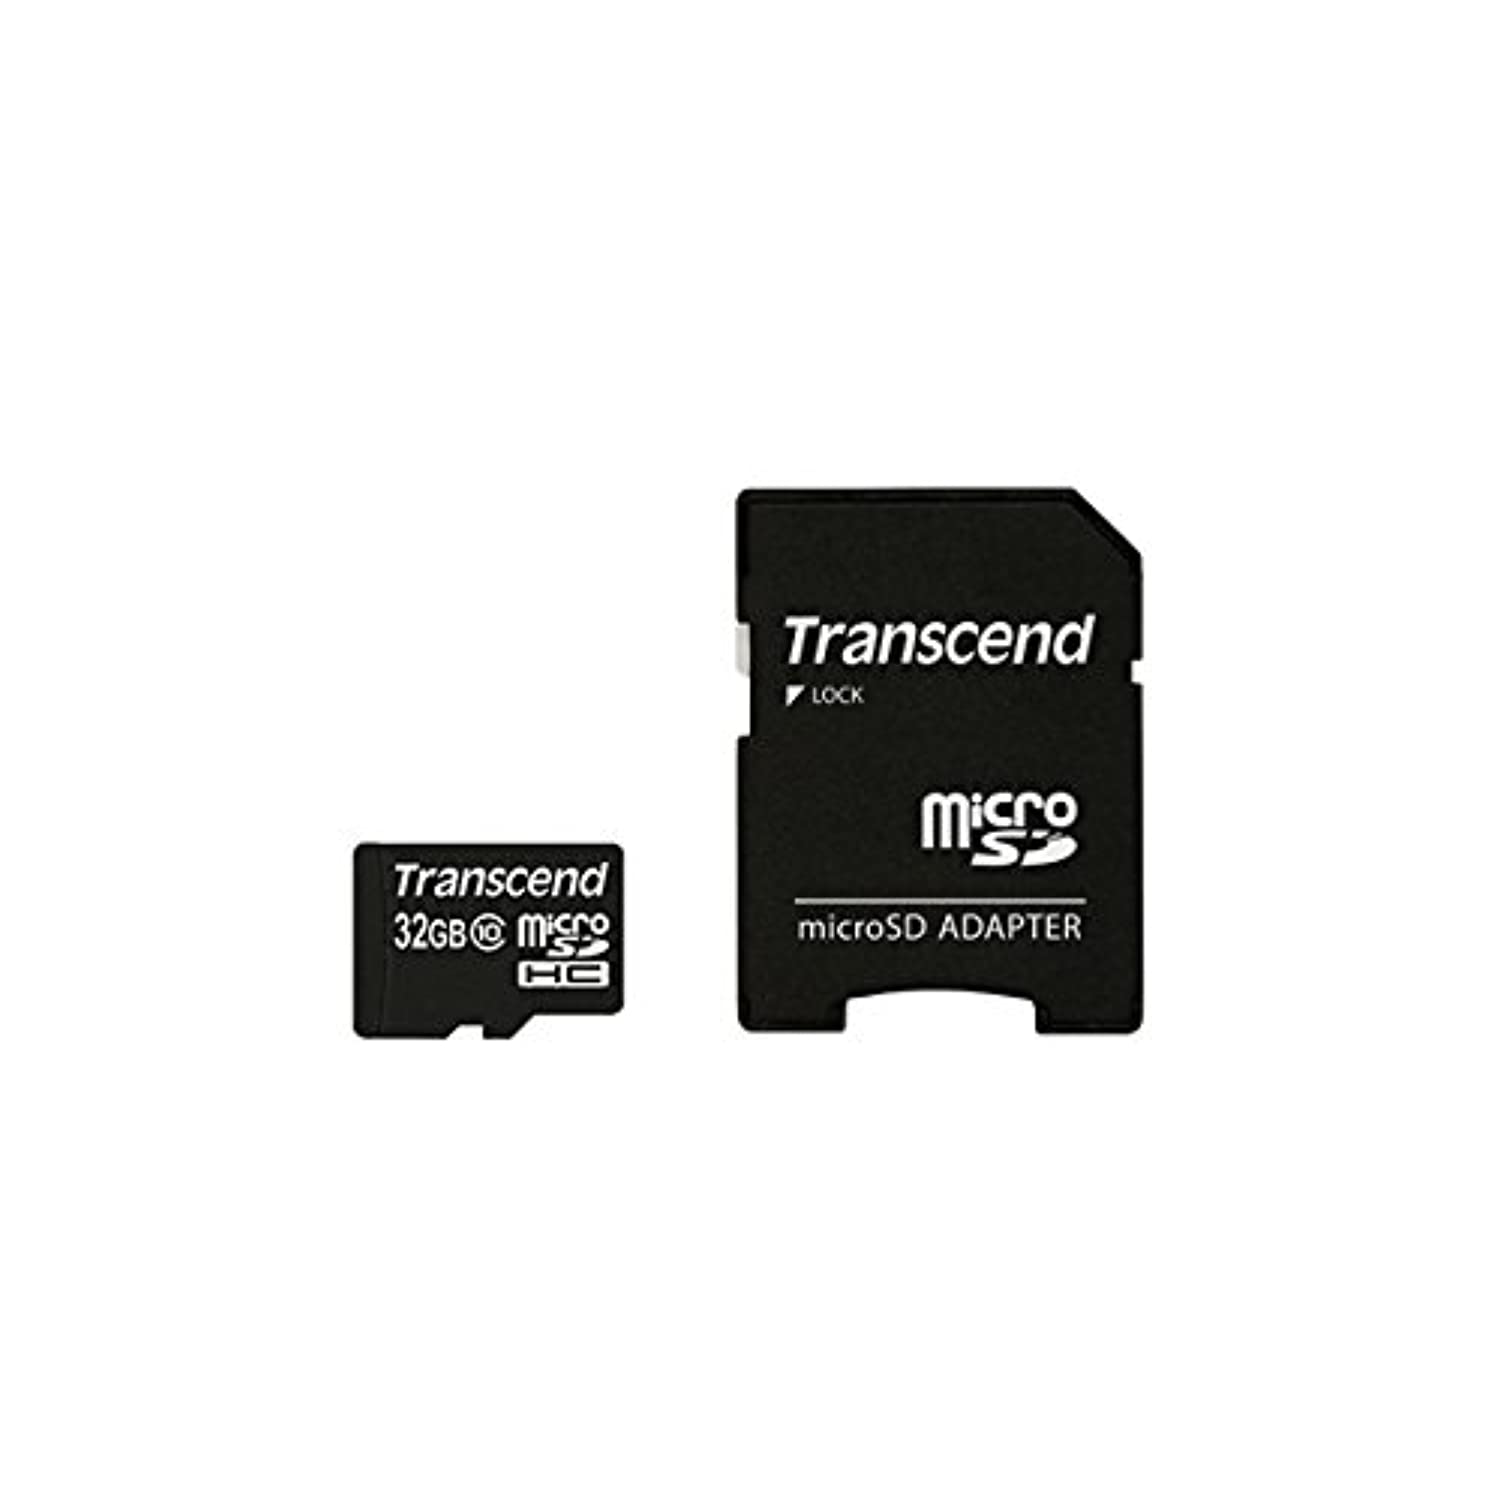 Transcend 32GB MicroSDHC Class10 Memory Card with Adapter 30 MB/s (TS32GUSDHC10) - image 3 of 3